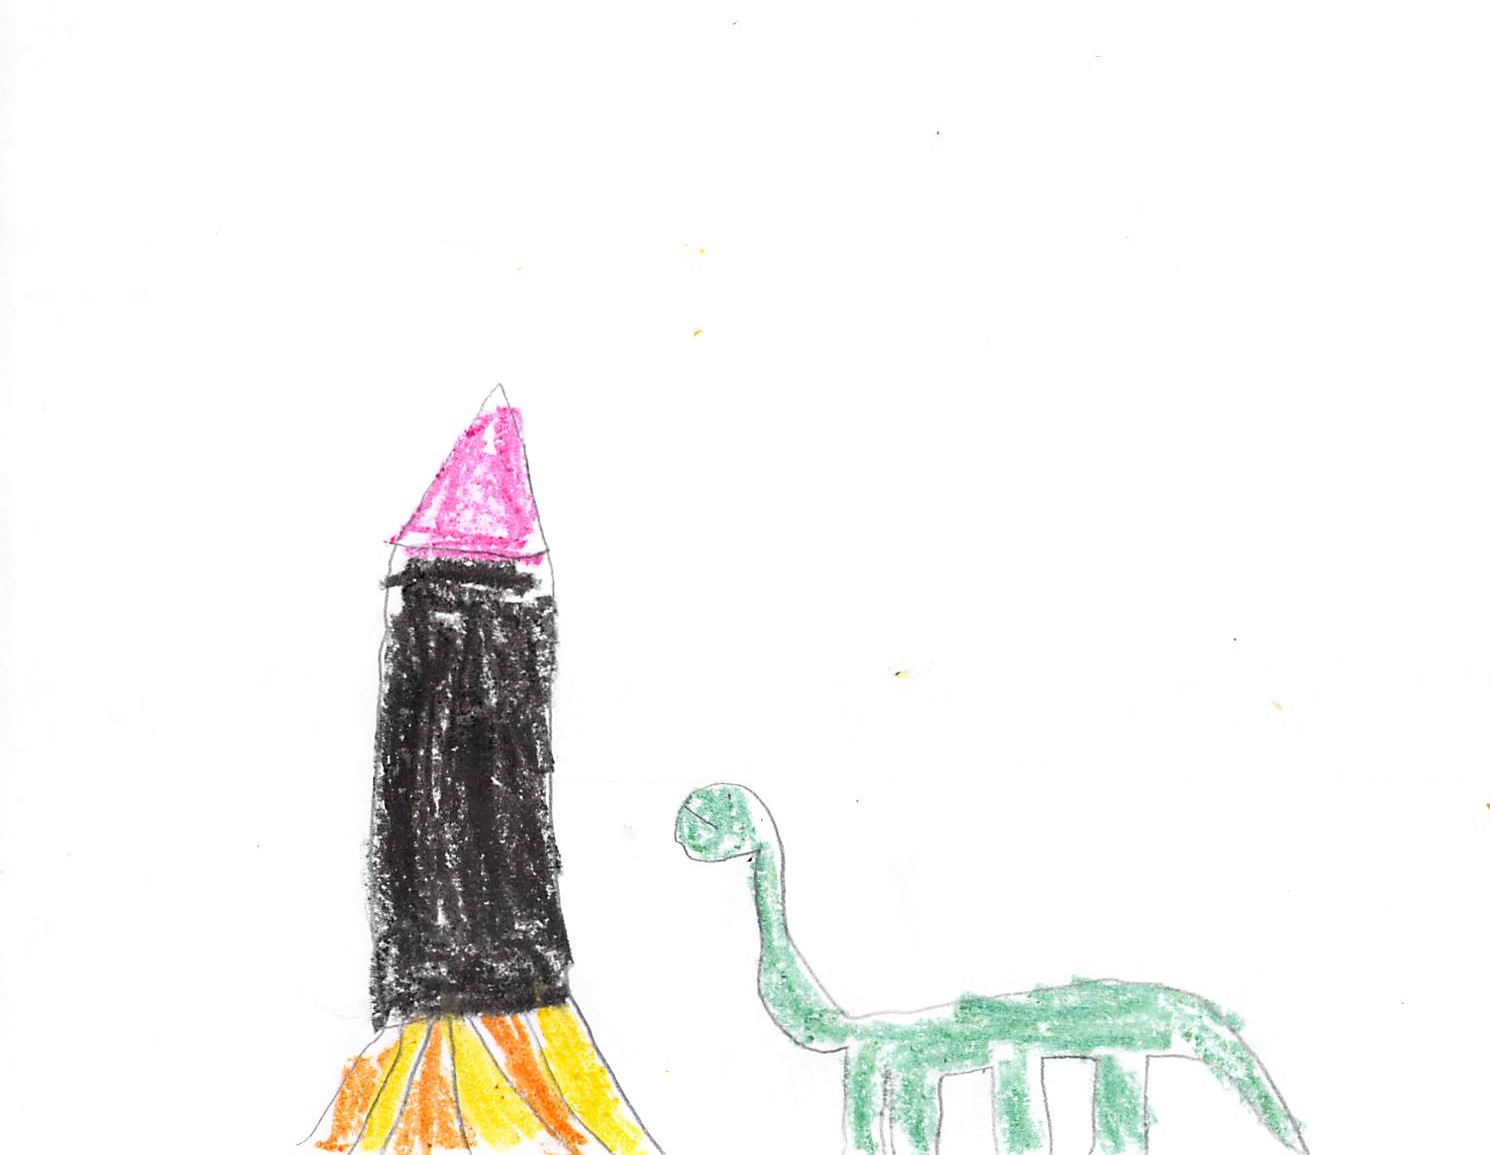 drawing of a dinosaur next to a rocket